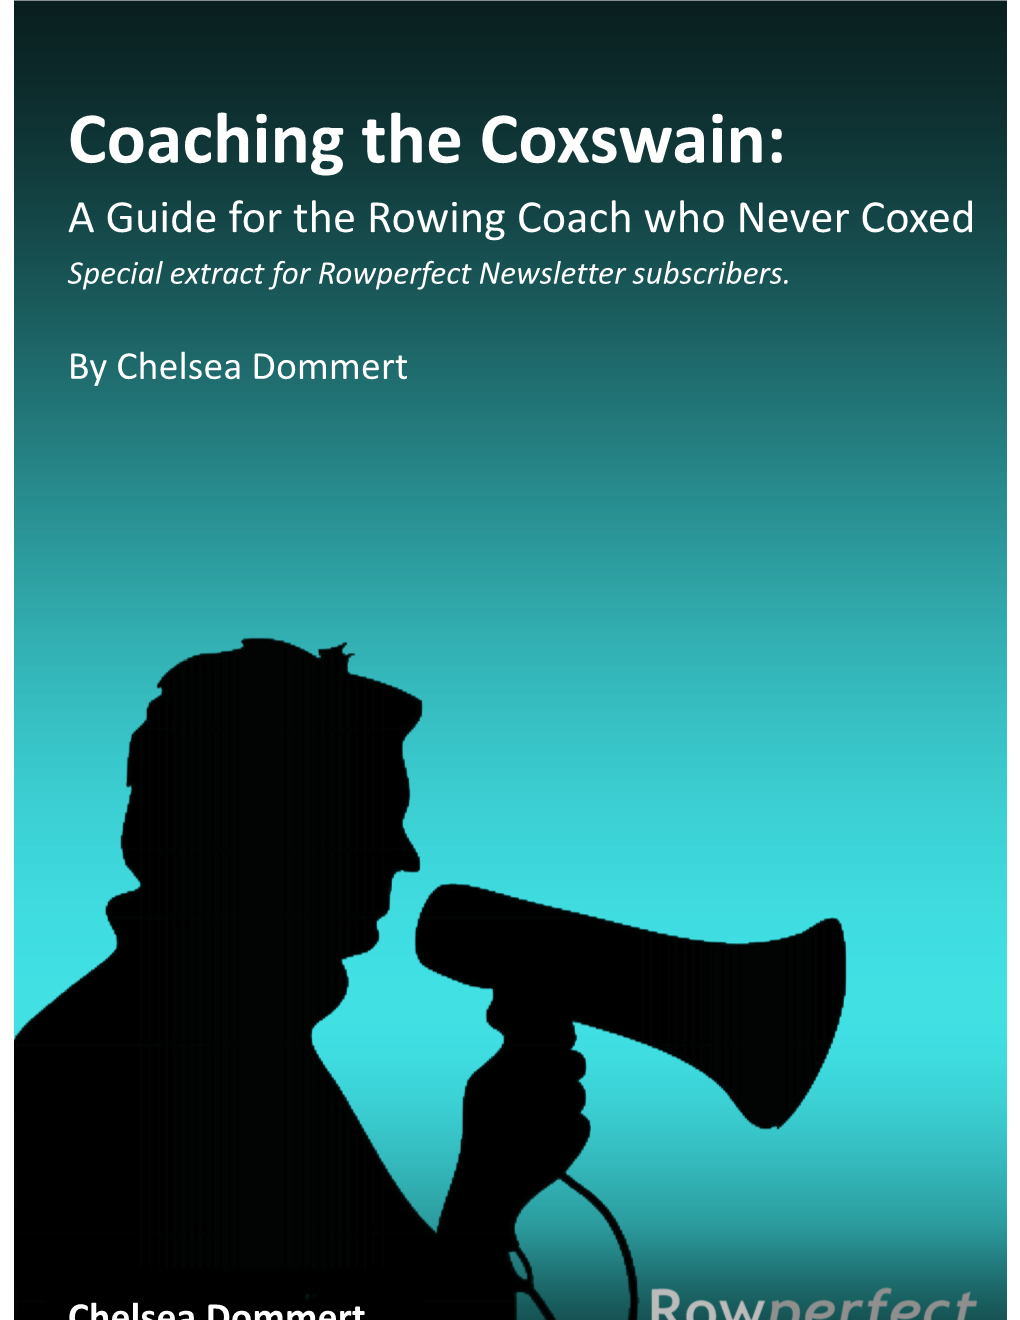 Coaching the Coxswain: a Guide for the Rowing Coach Who Never Coxed Special Extract for Rowperfect Newsletter Subscribers